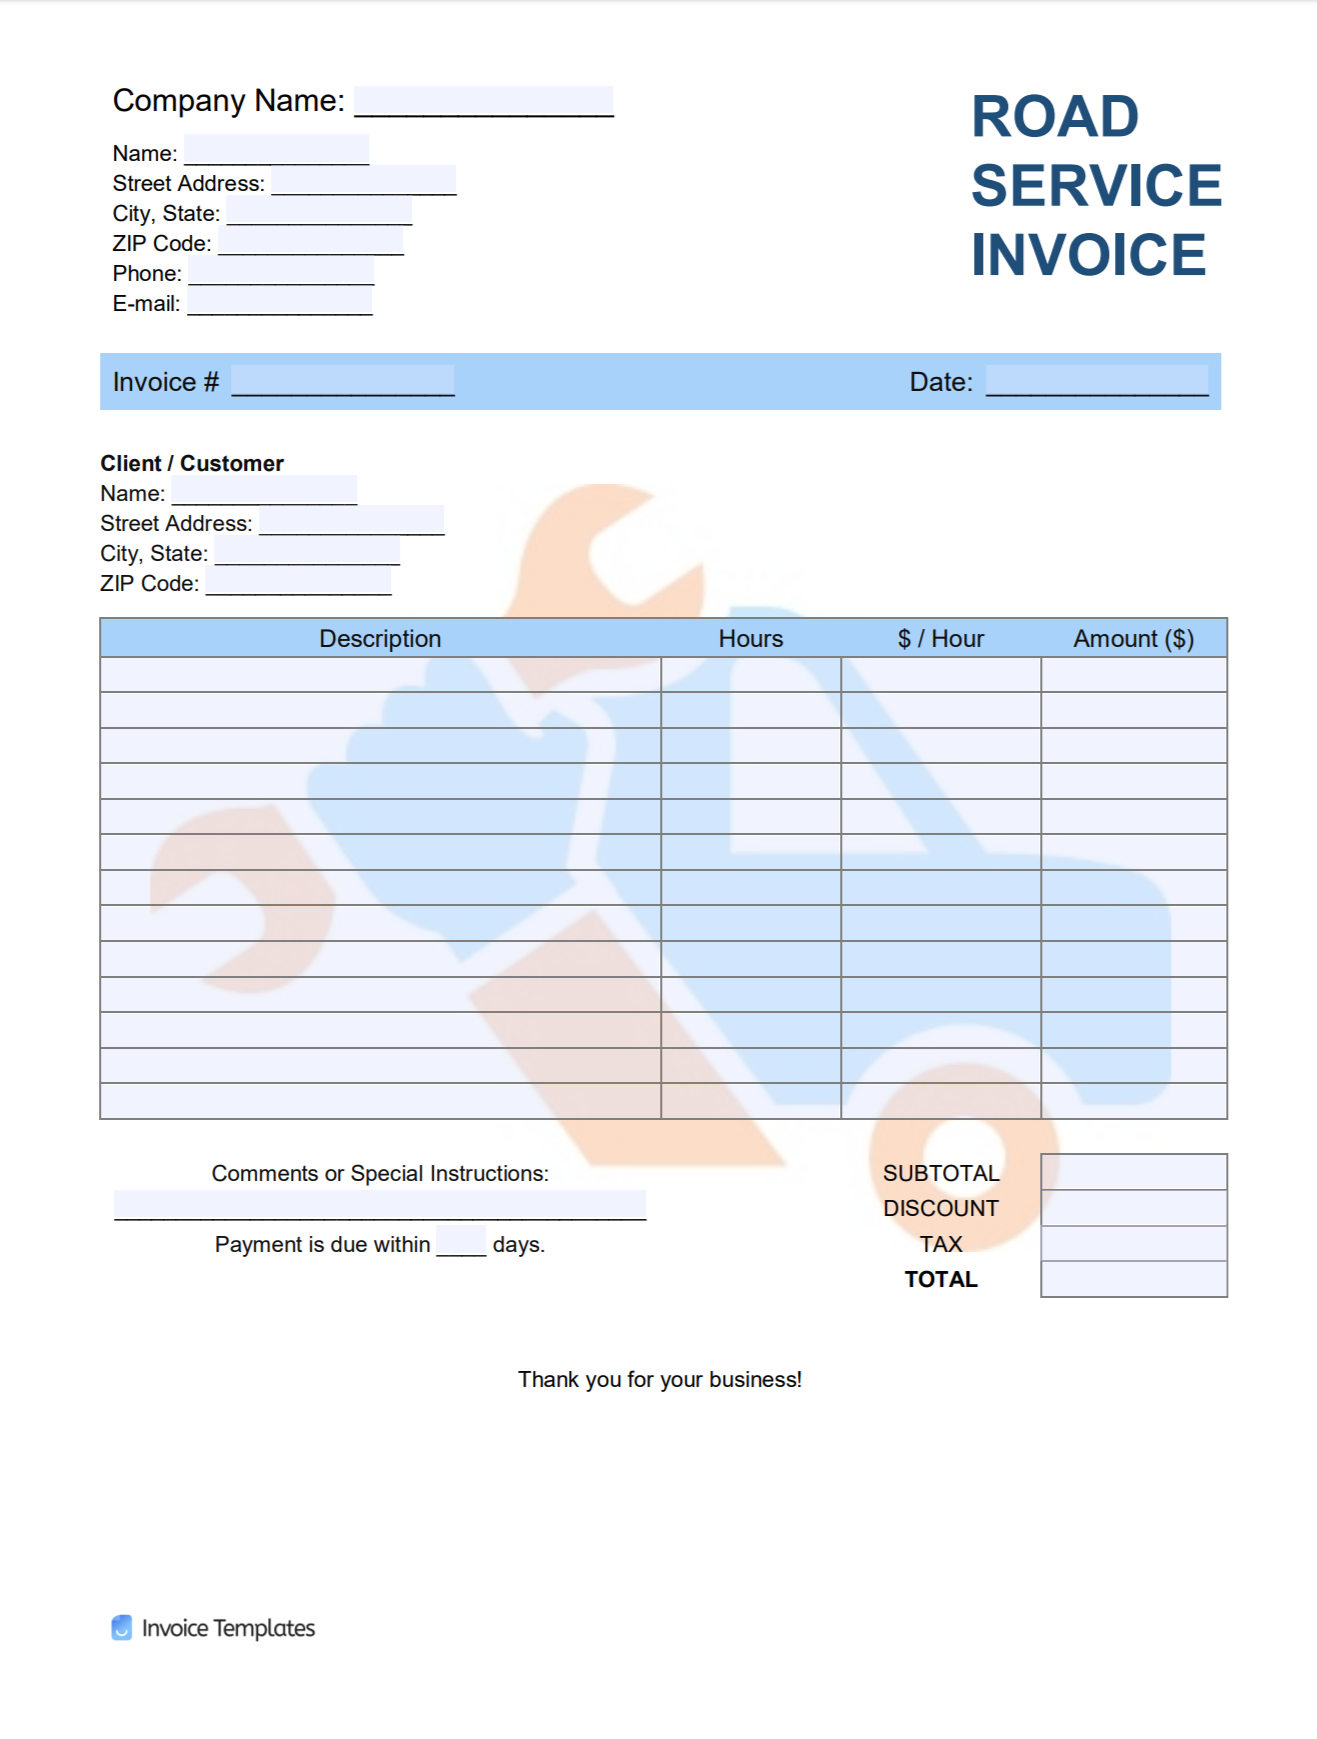 Free Road Service Invoice Template  PDF  WORD  EXCEL With Towing Service Invoice Template